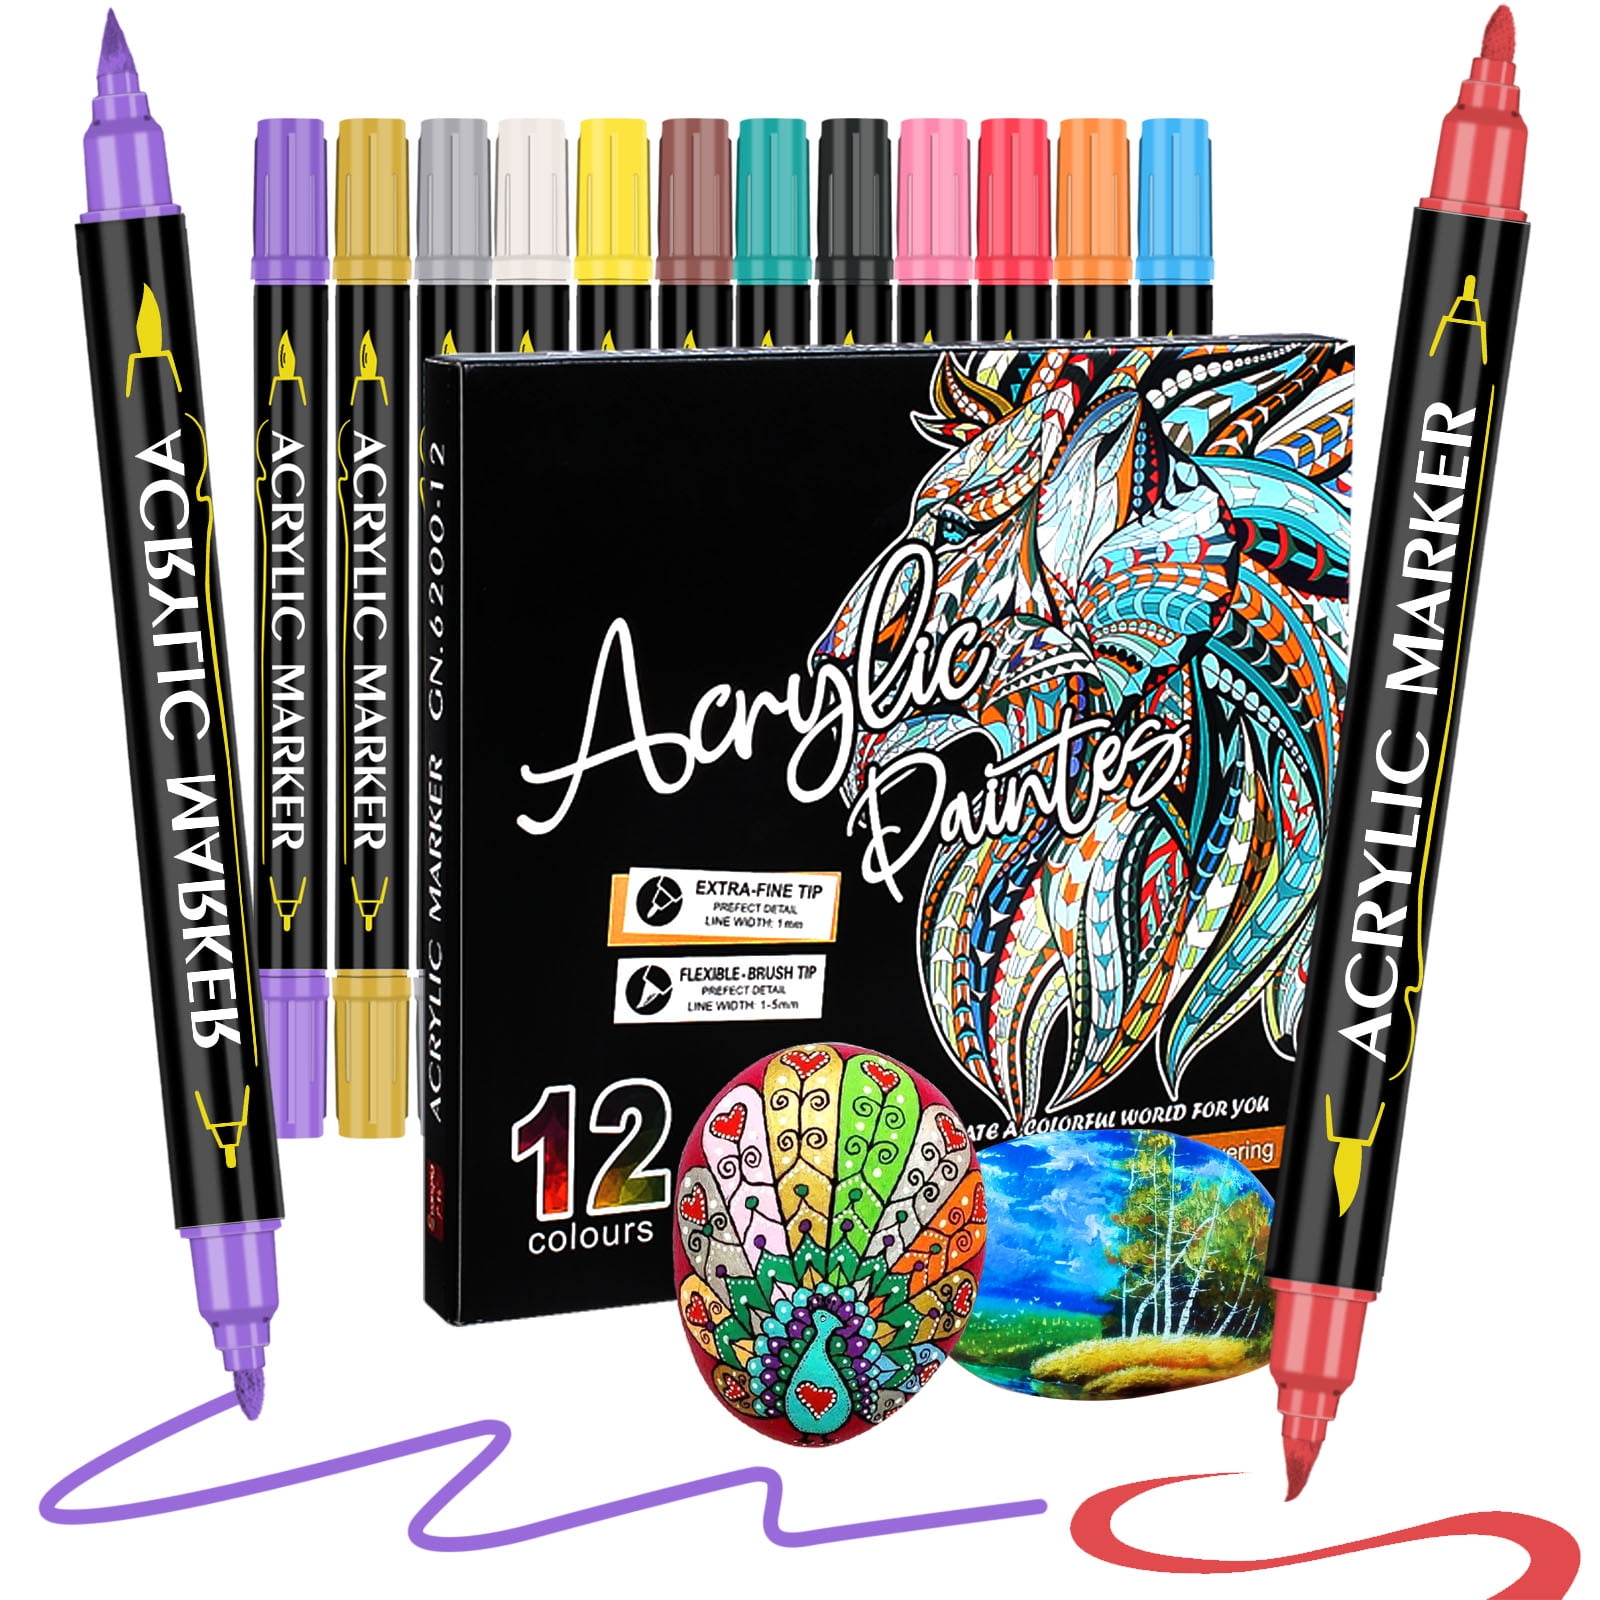  VILLCASE 1 Set scrapbook paint markers drawing acrylic paint  pens drawing acrylic pens extra fine tip dry erase marker ultra fine point  dry erase markers plastic face acrylic brush 